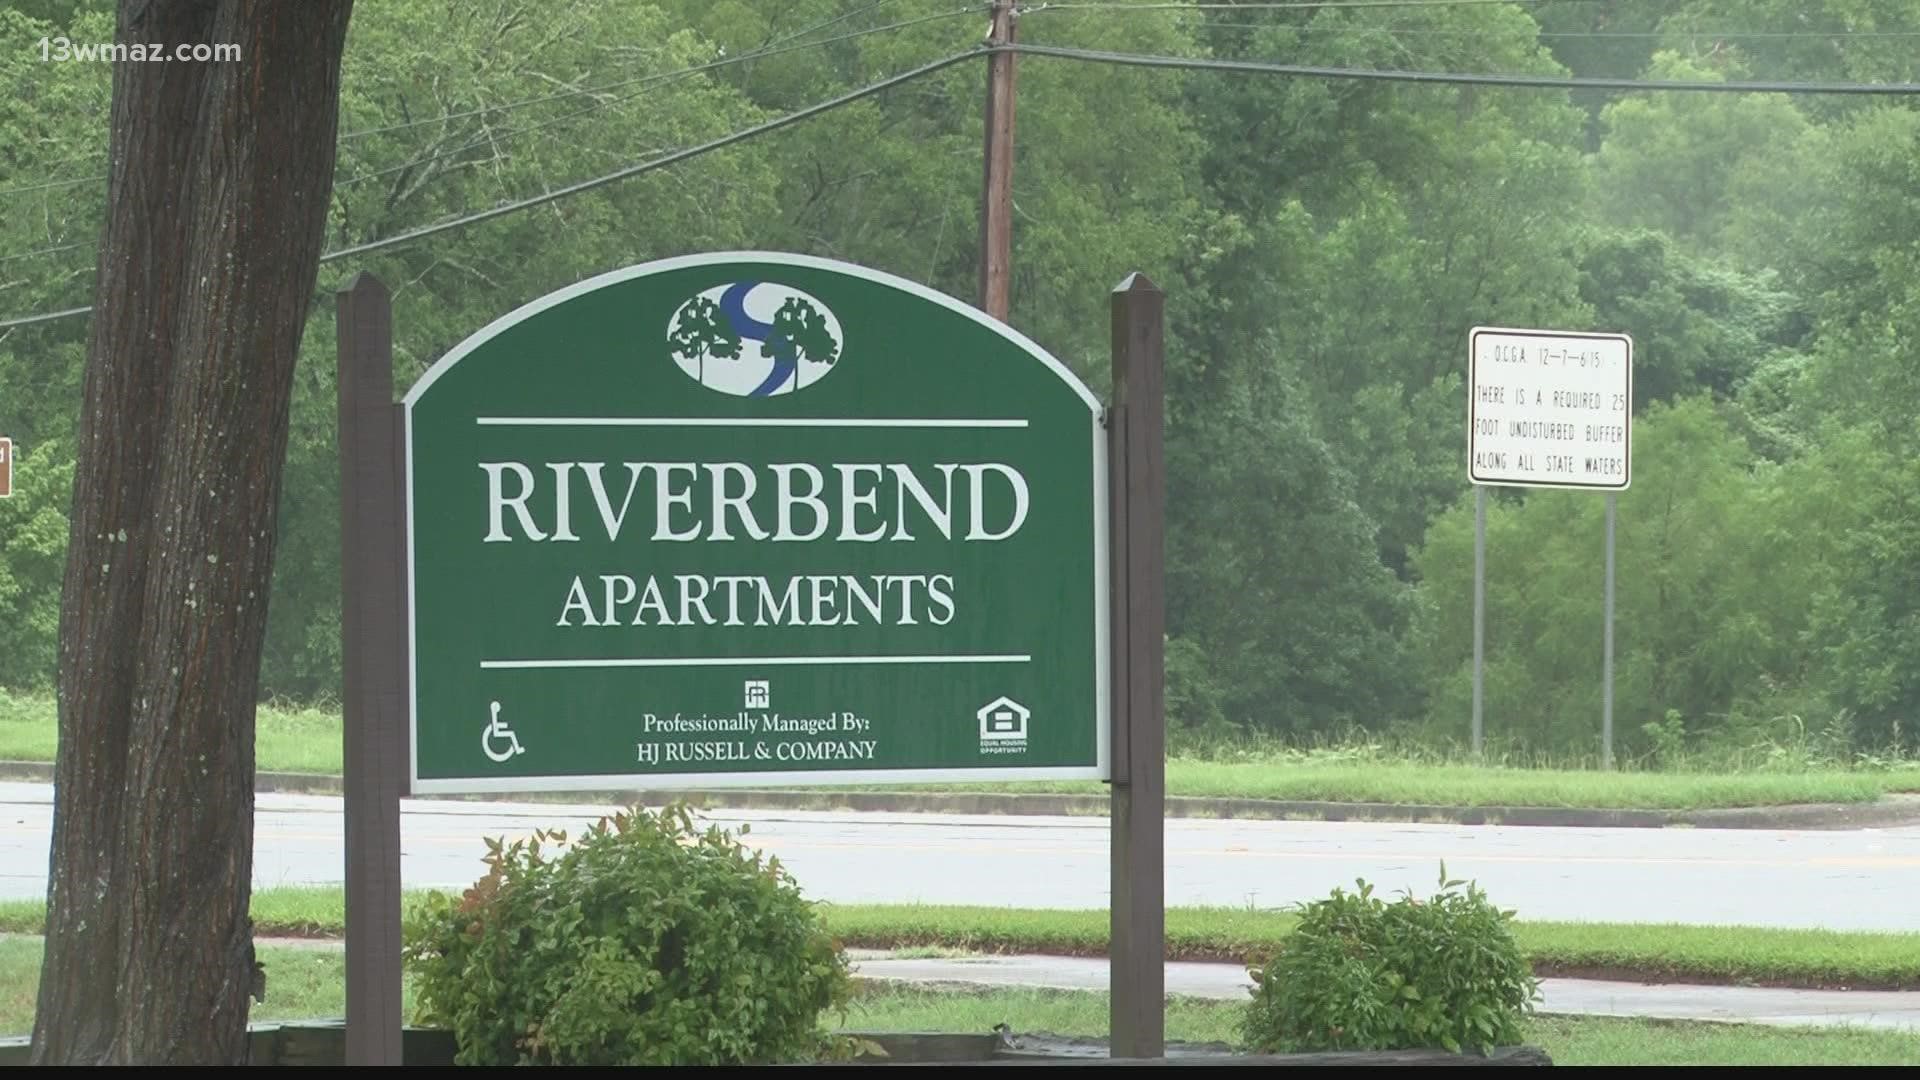 A shooting at the Riverbend Apartments in Milledgeville early Friday morning sent three people to the hospital and led to a manhunt.